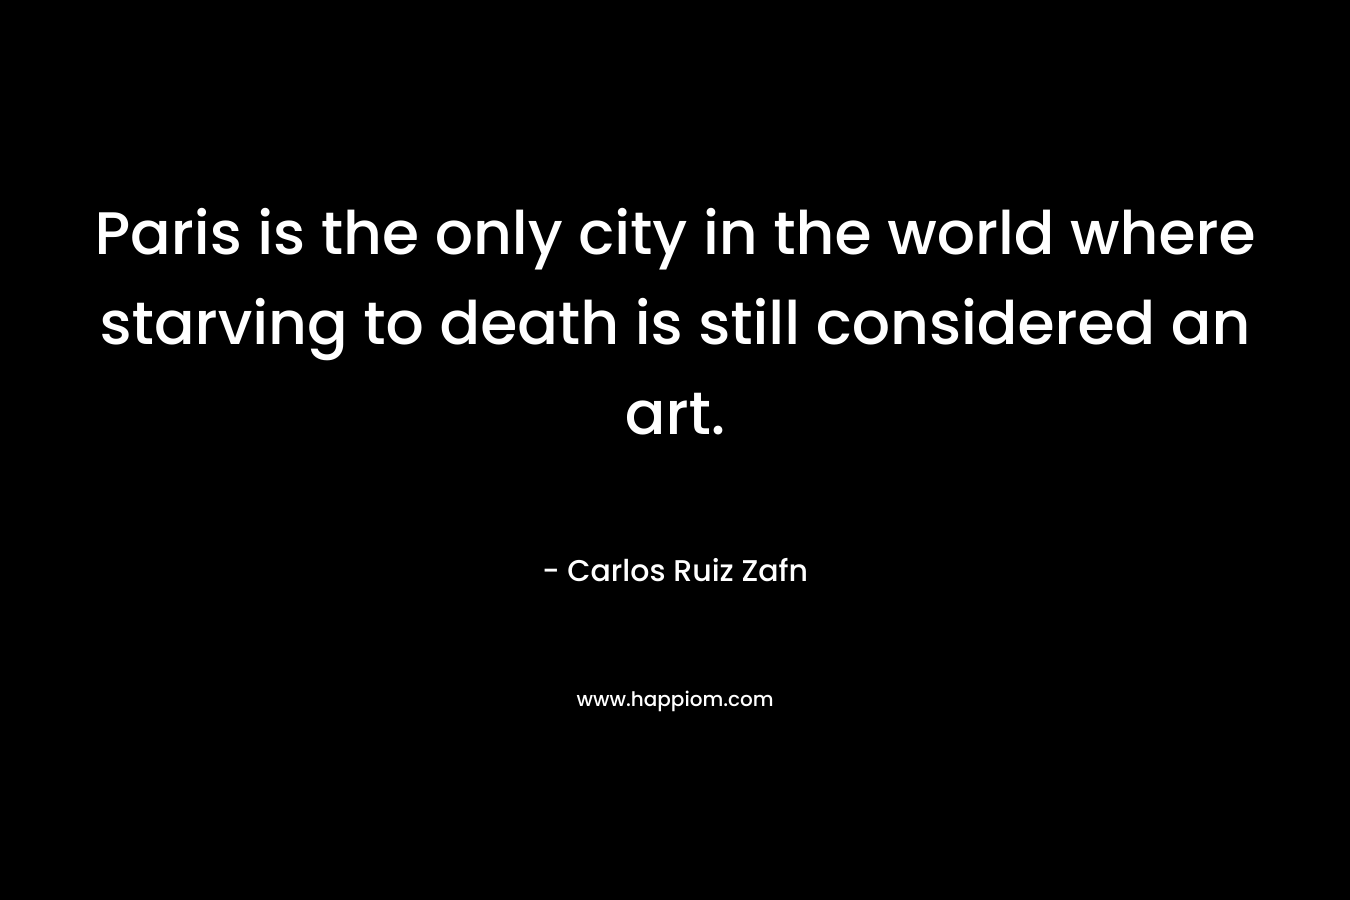 Paris is the only city in the world where starving to death is still considered an art.